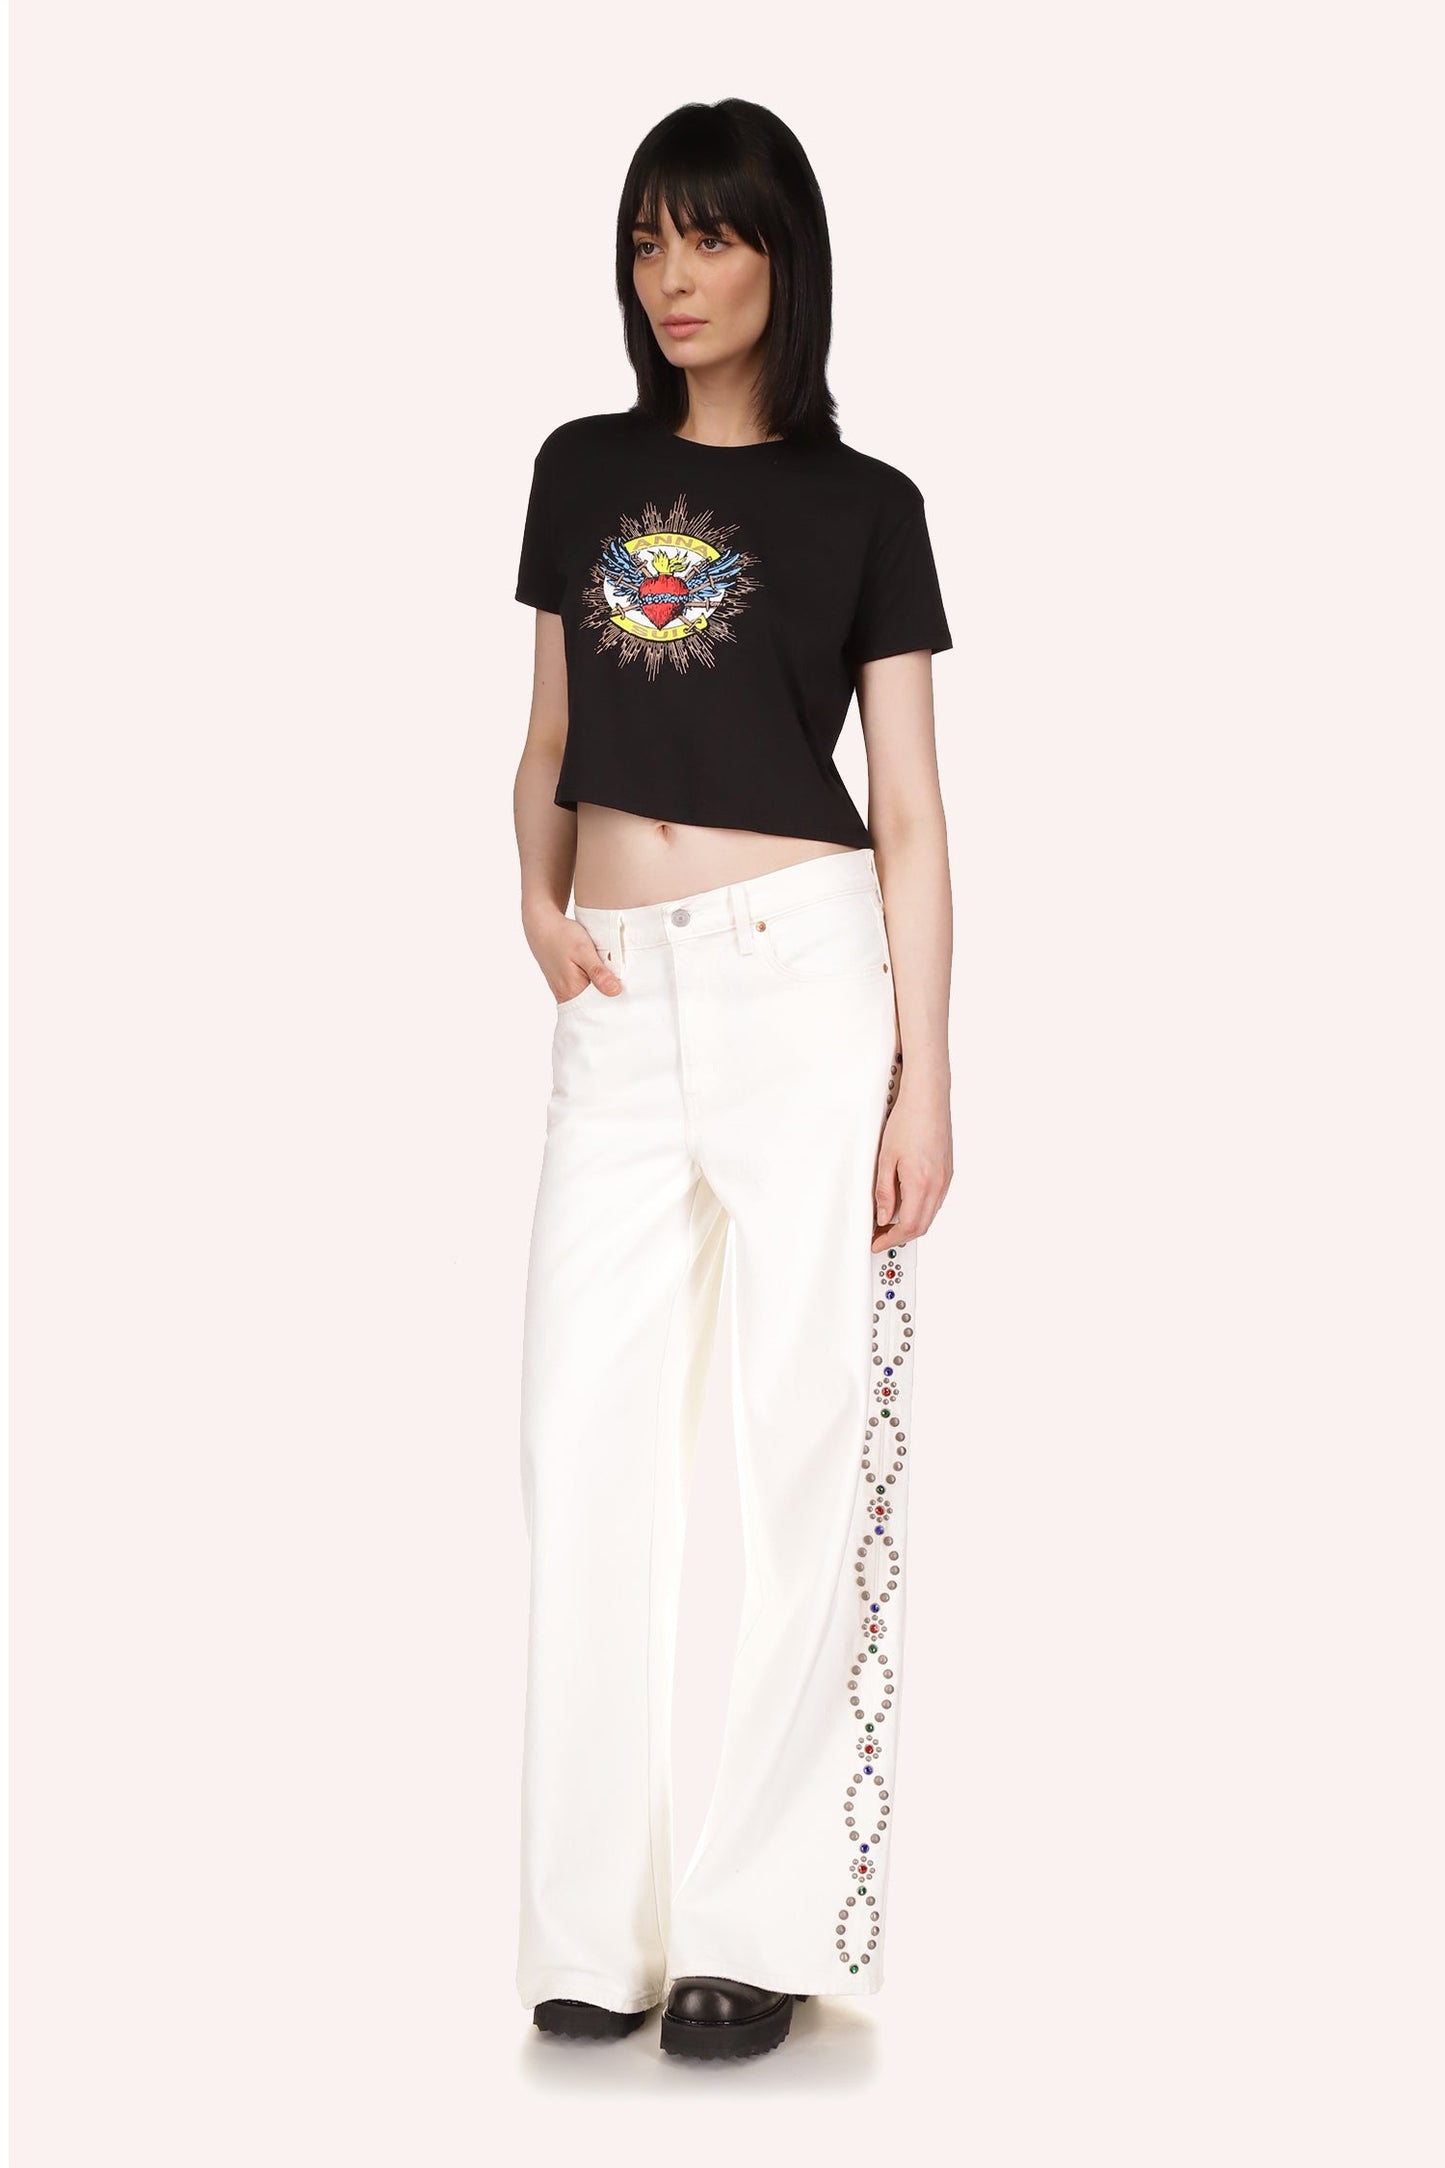 The Anna Sui Sacred Heart Cropped T-Shirt in Black Multi is a short-sleeved t-shirt